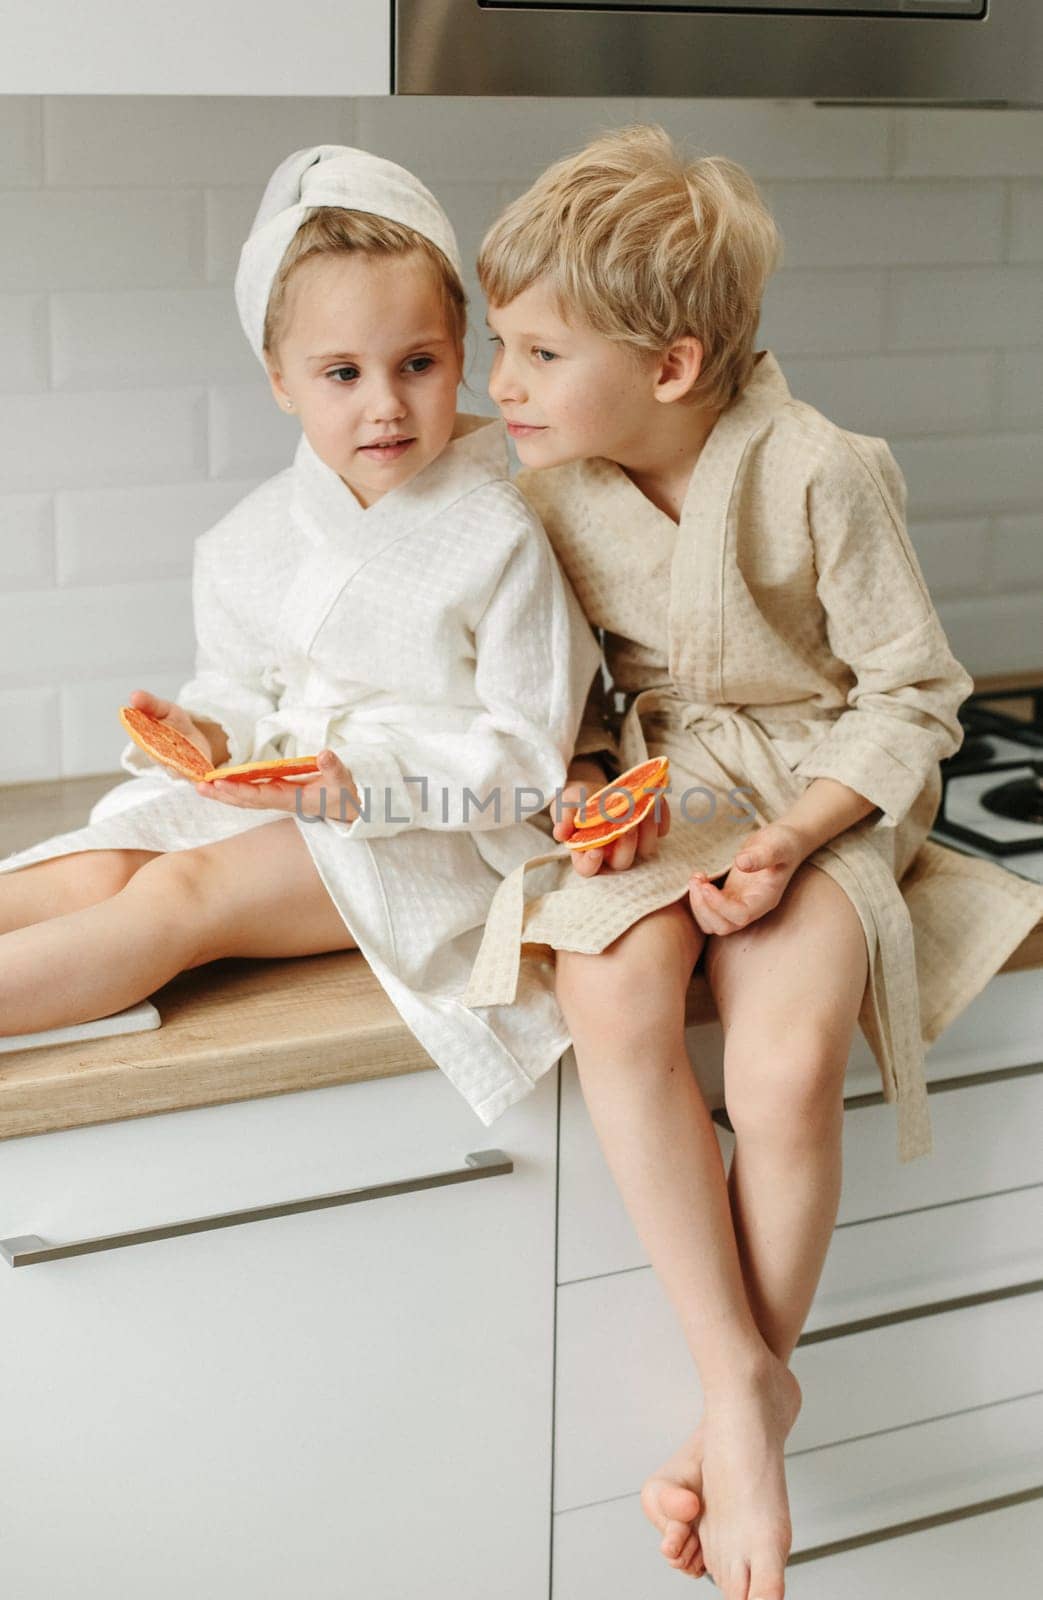 A boy and a girl in bathrobes are sitting in the kitchen talking, eating candied fruit.